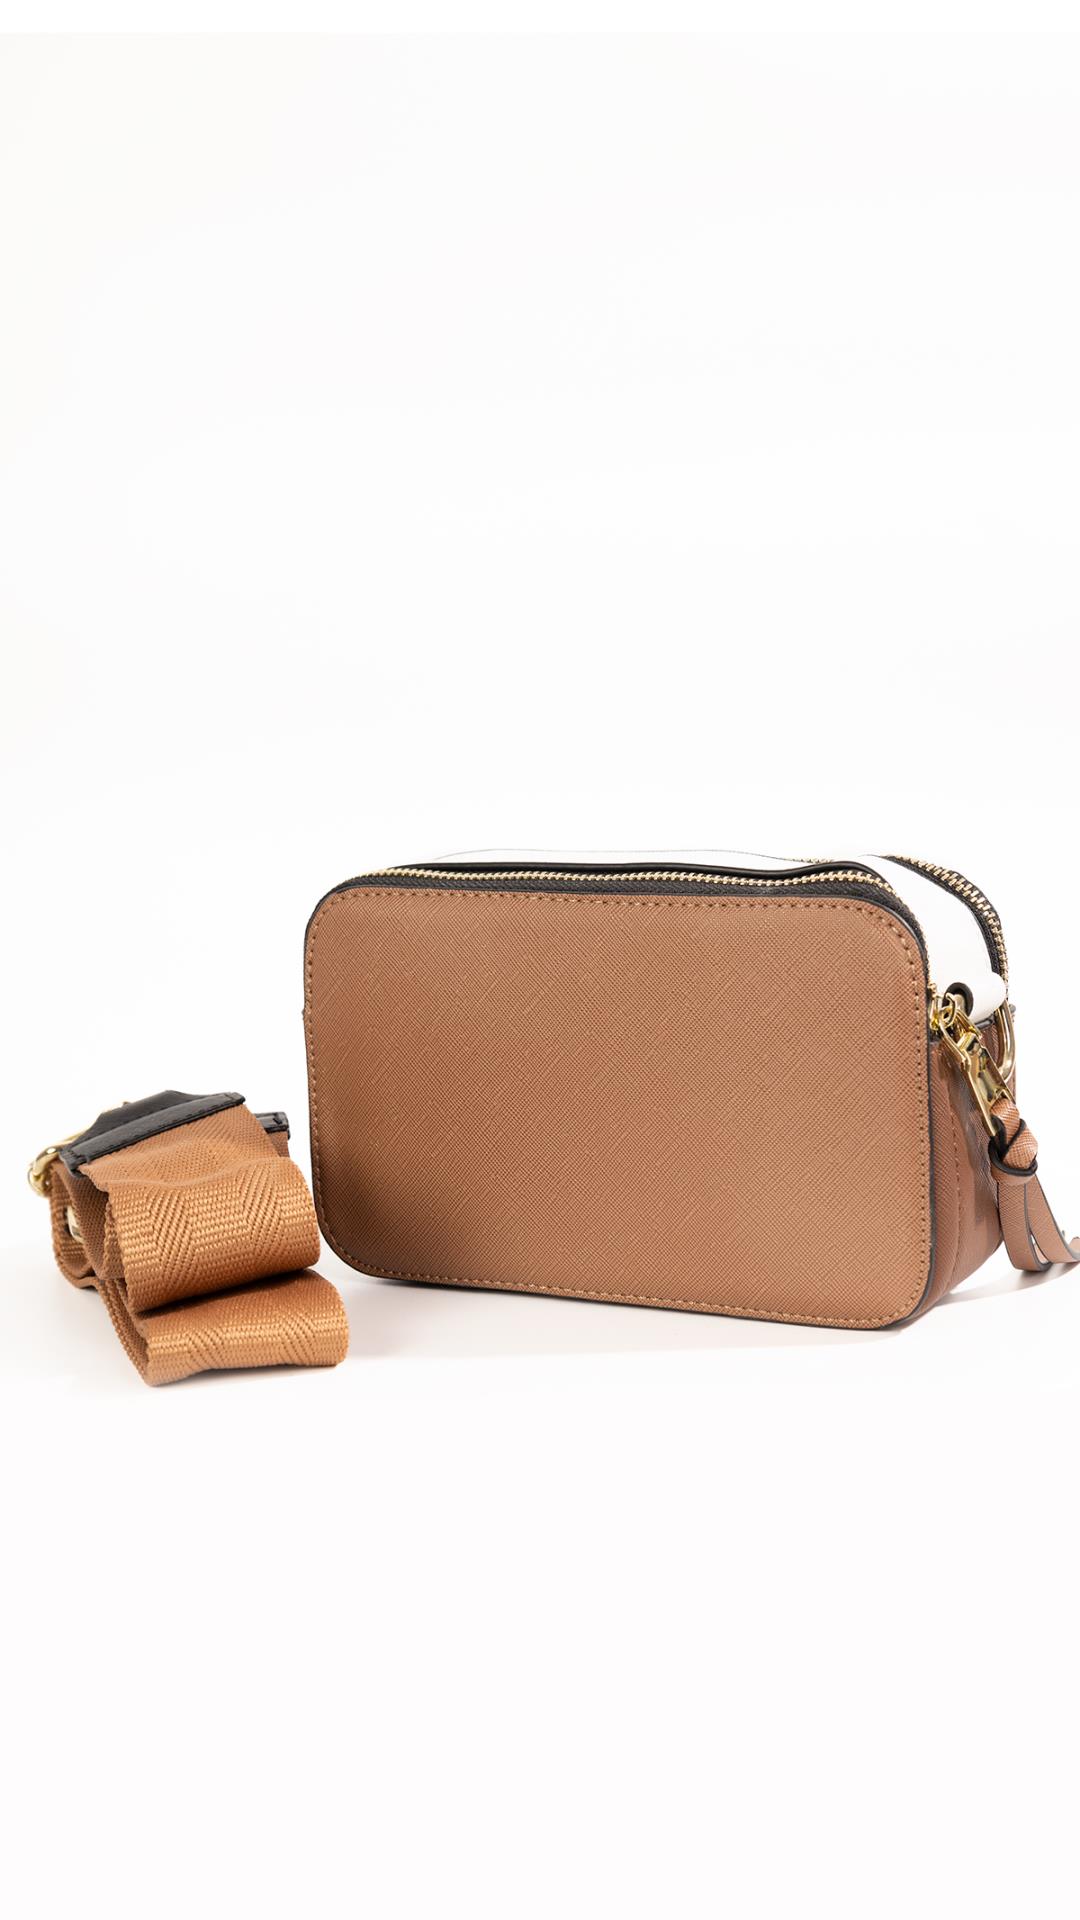 Small leather handbag with fabric strap 